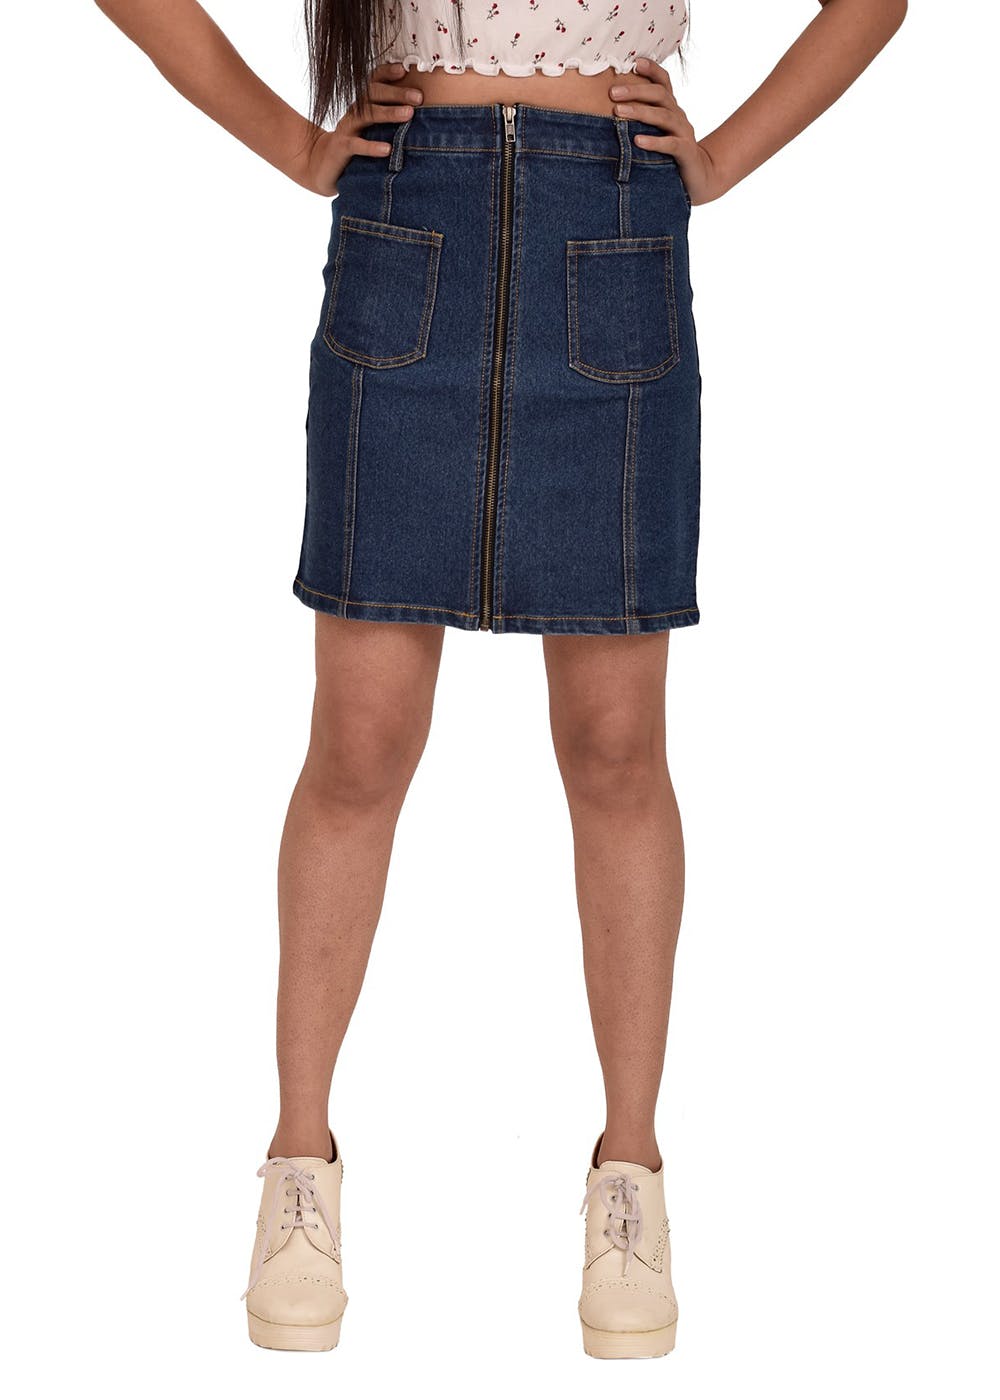 Discover 68+ denim patch skirt latest